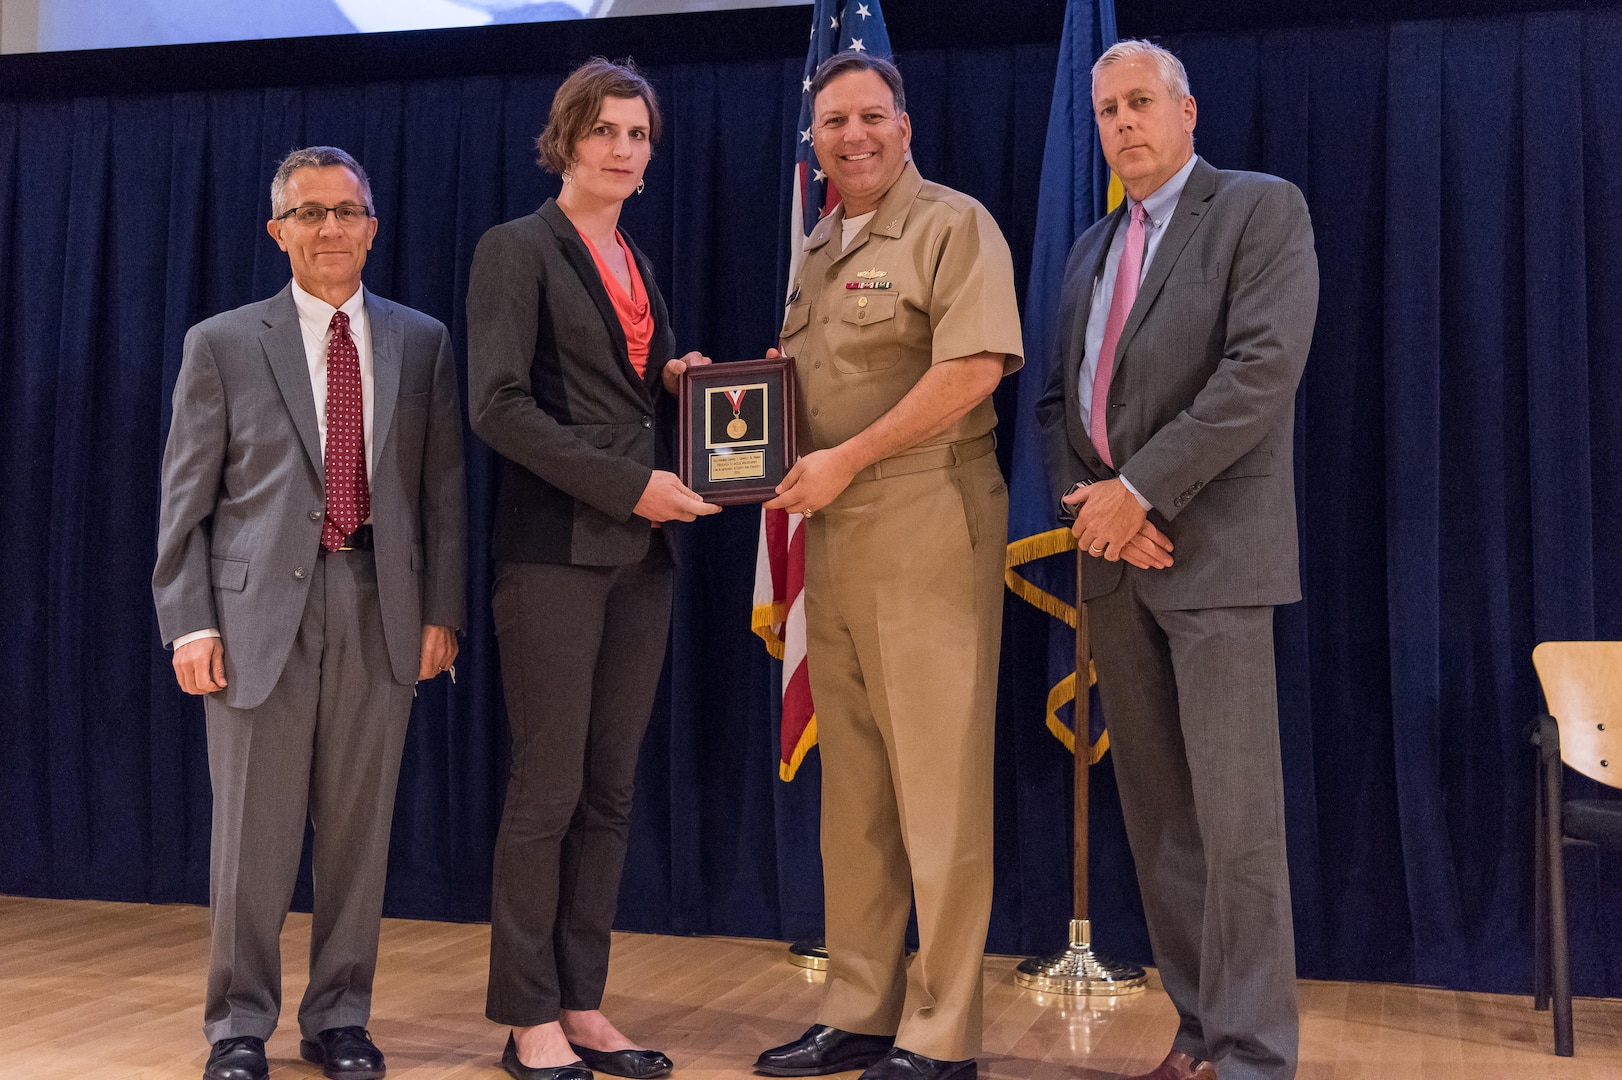 JaeLee Waldschmidt, a Carderock engineer detailed to Naval Sea Systems Command (NAVSEA), receives the Vice Adm. Samuel L. Gravely Jr. Award for achievement in equity and diversity at the Naval Surface Warfare Center, Carderock Division Honor Awards ceremony Aug. 1, 2017, in West Bethesda, Md. From left to right: Technical Director Dr. Tim Arcano, Waldschmidt, Commanding Officer Capt. Mark Vandroff and Naval Architecture and Engineering Department Head Mike Brown. (U.S. Navy photo by Jake Cirksena/Released)